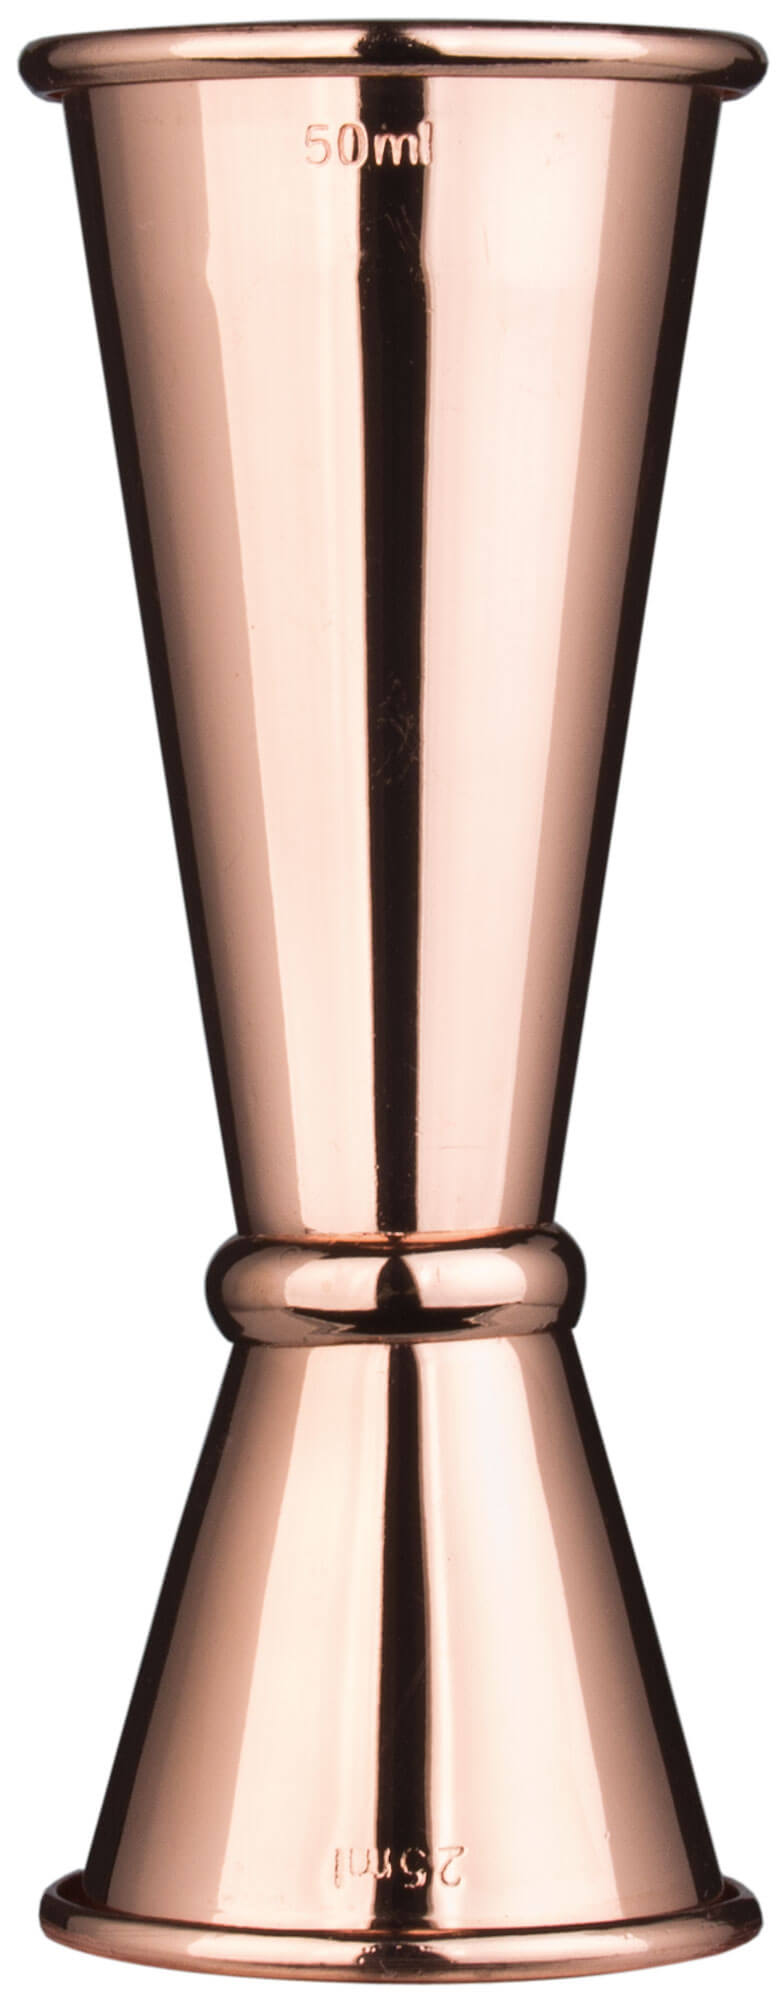 Jigger copper colored - stainless steel (25/50ml)